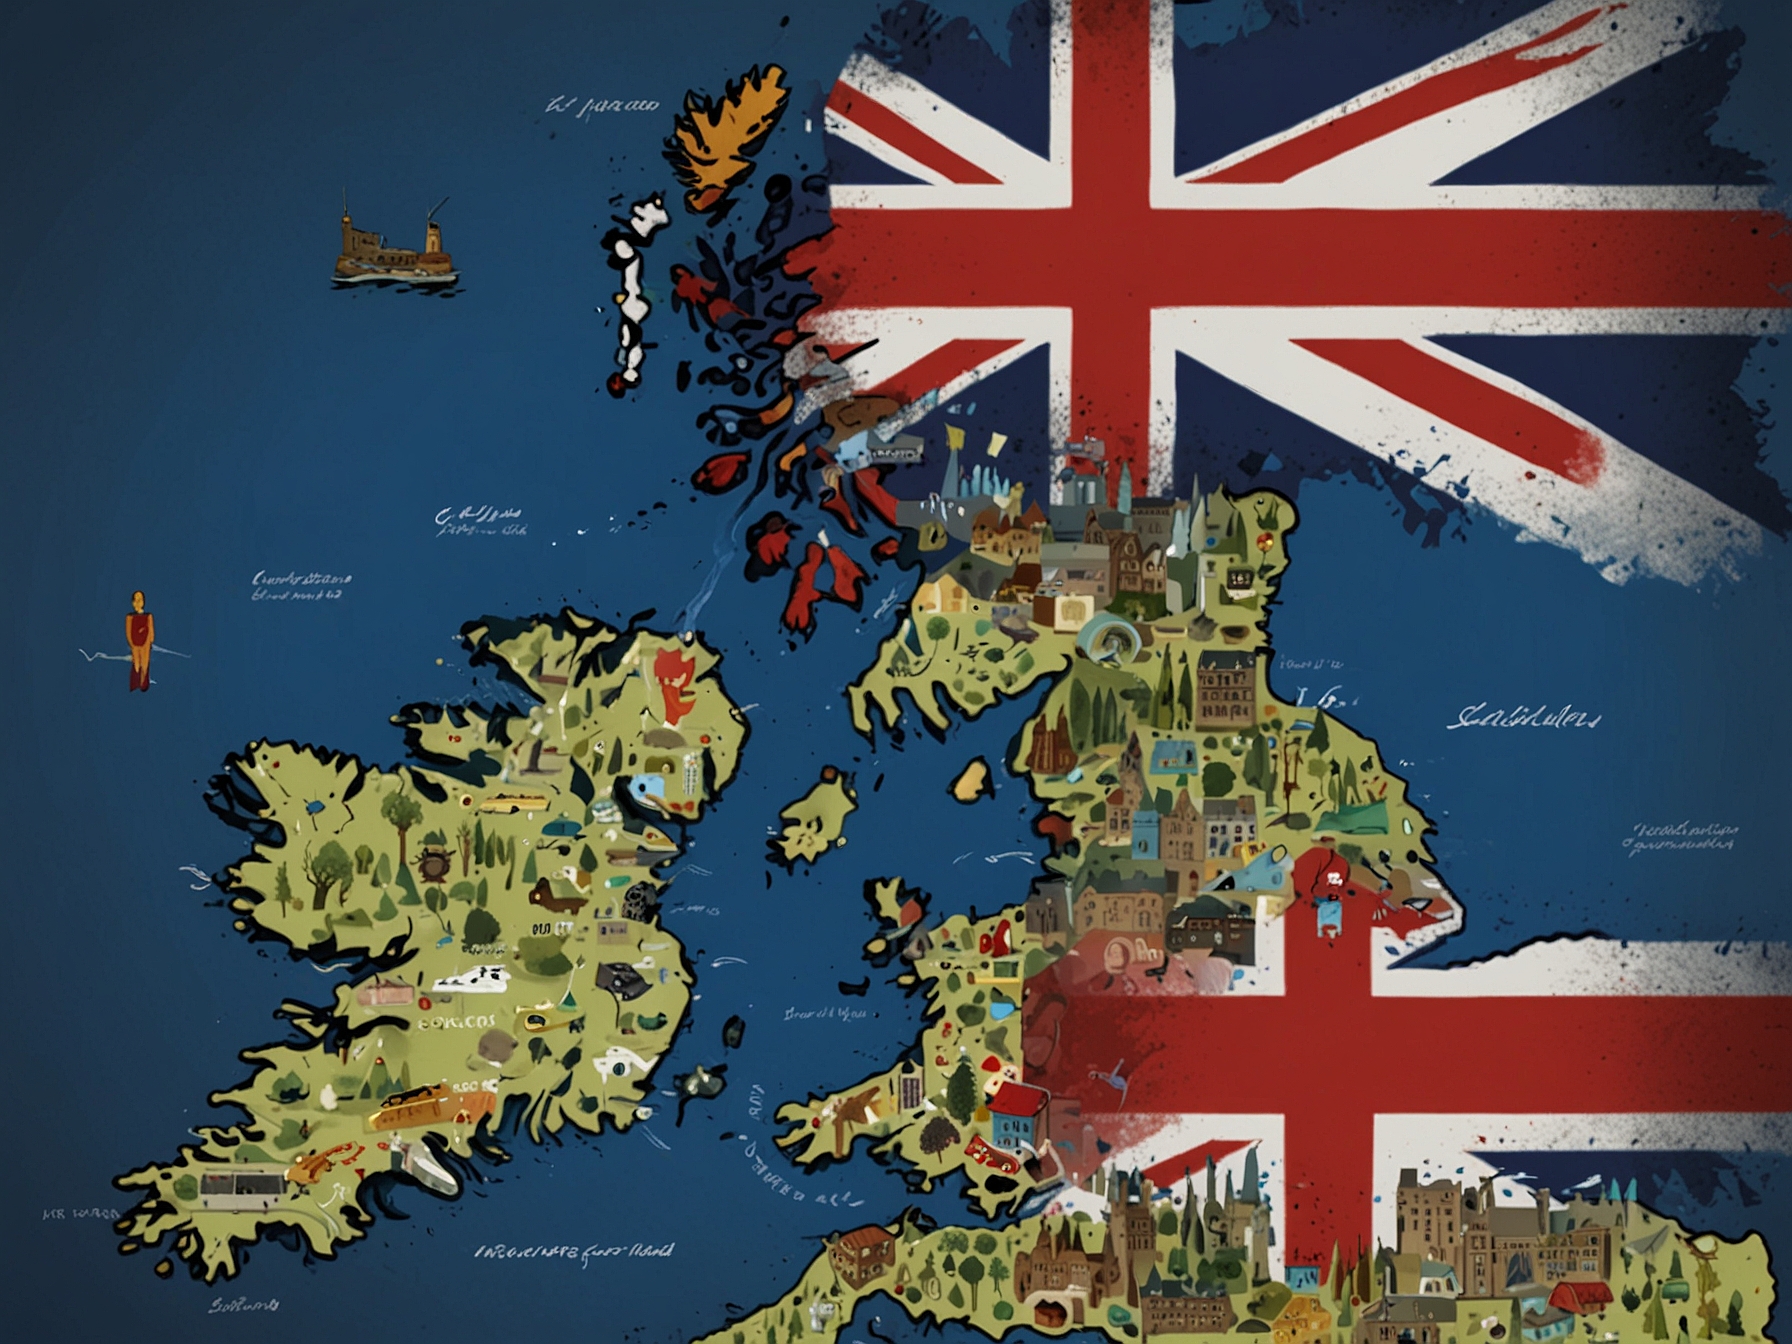 A map of the United Kingdom highlighting Scotland, with icons depicting healthcare, education, and transportation to illustrate the various areas under Scotland's devolved control.